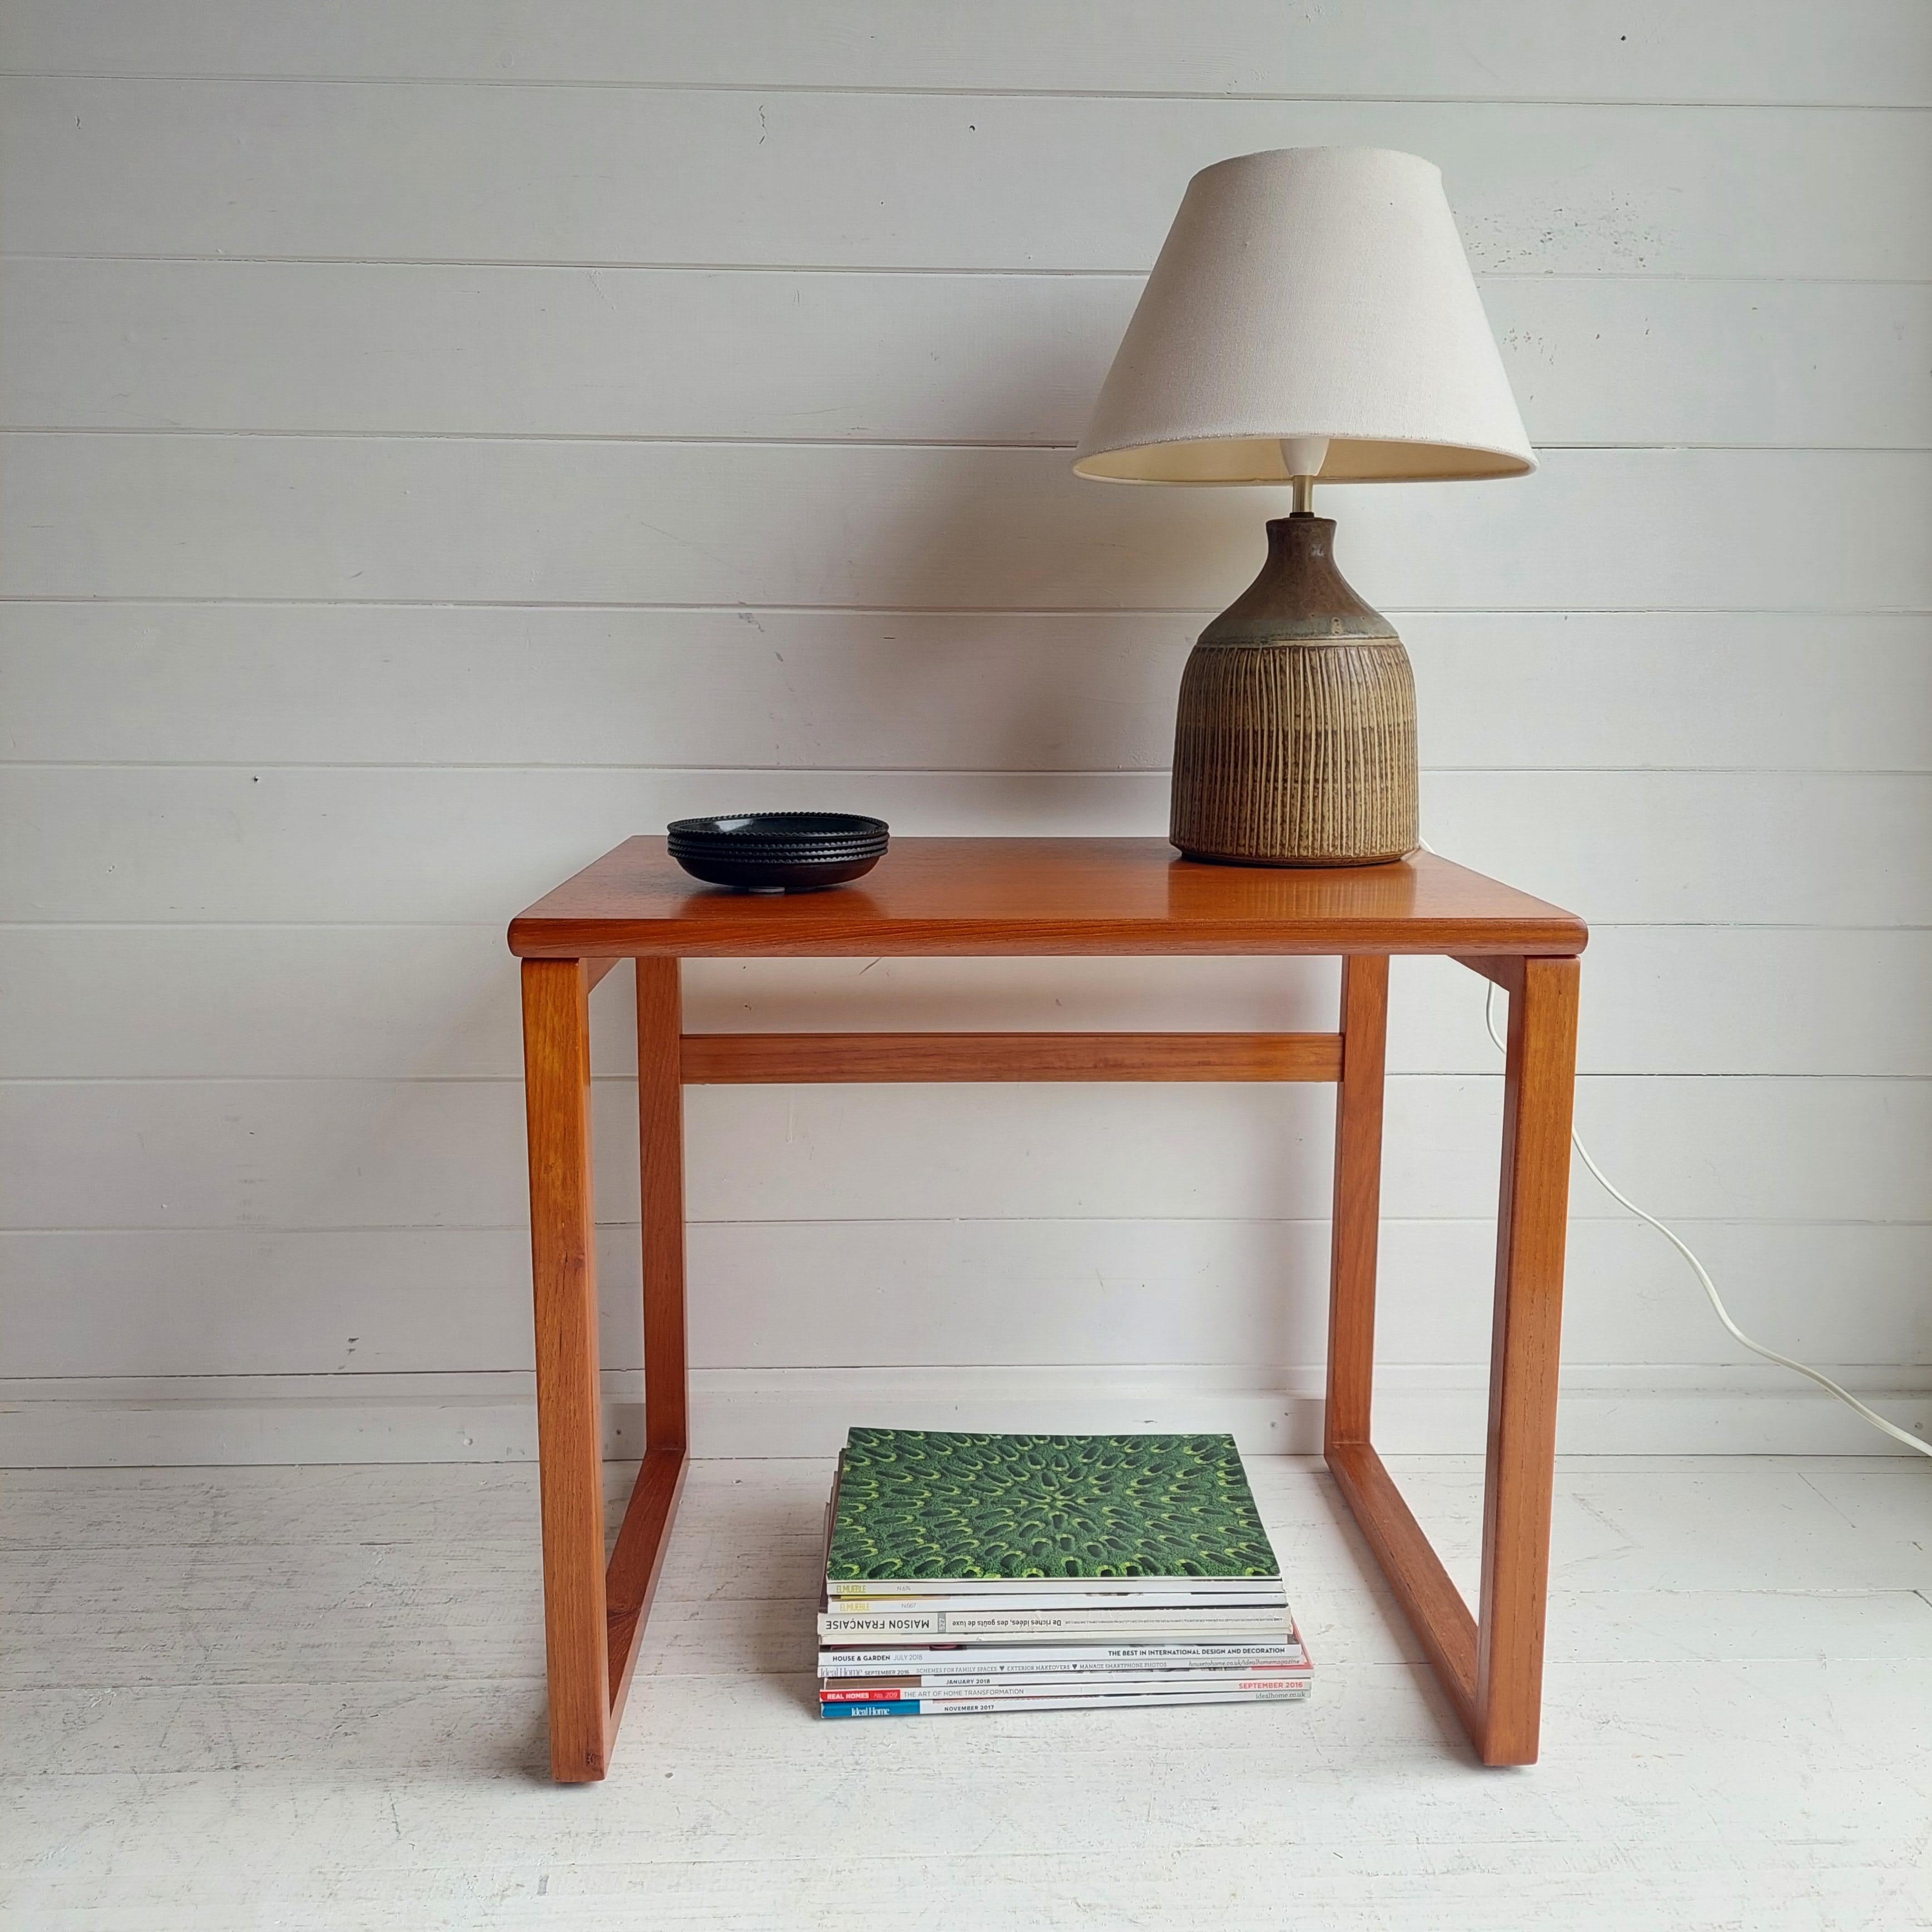 An understated, minimalist teak mid century modern side table c.1970s/80s

A very elegant design with beautiful styled cube leg style base.
Mid century modern era
Gplan in style
Cube design with simple but elegant lines
Scandinavian in